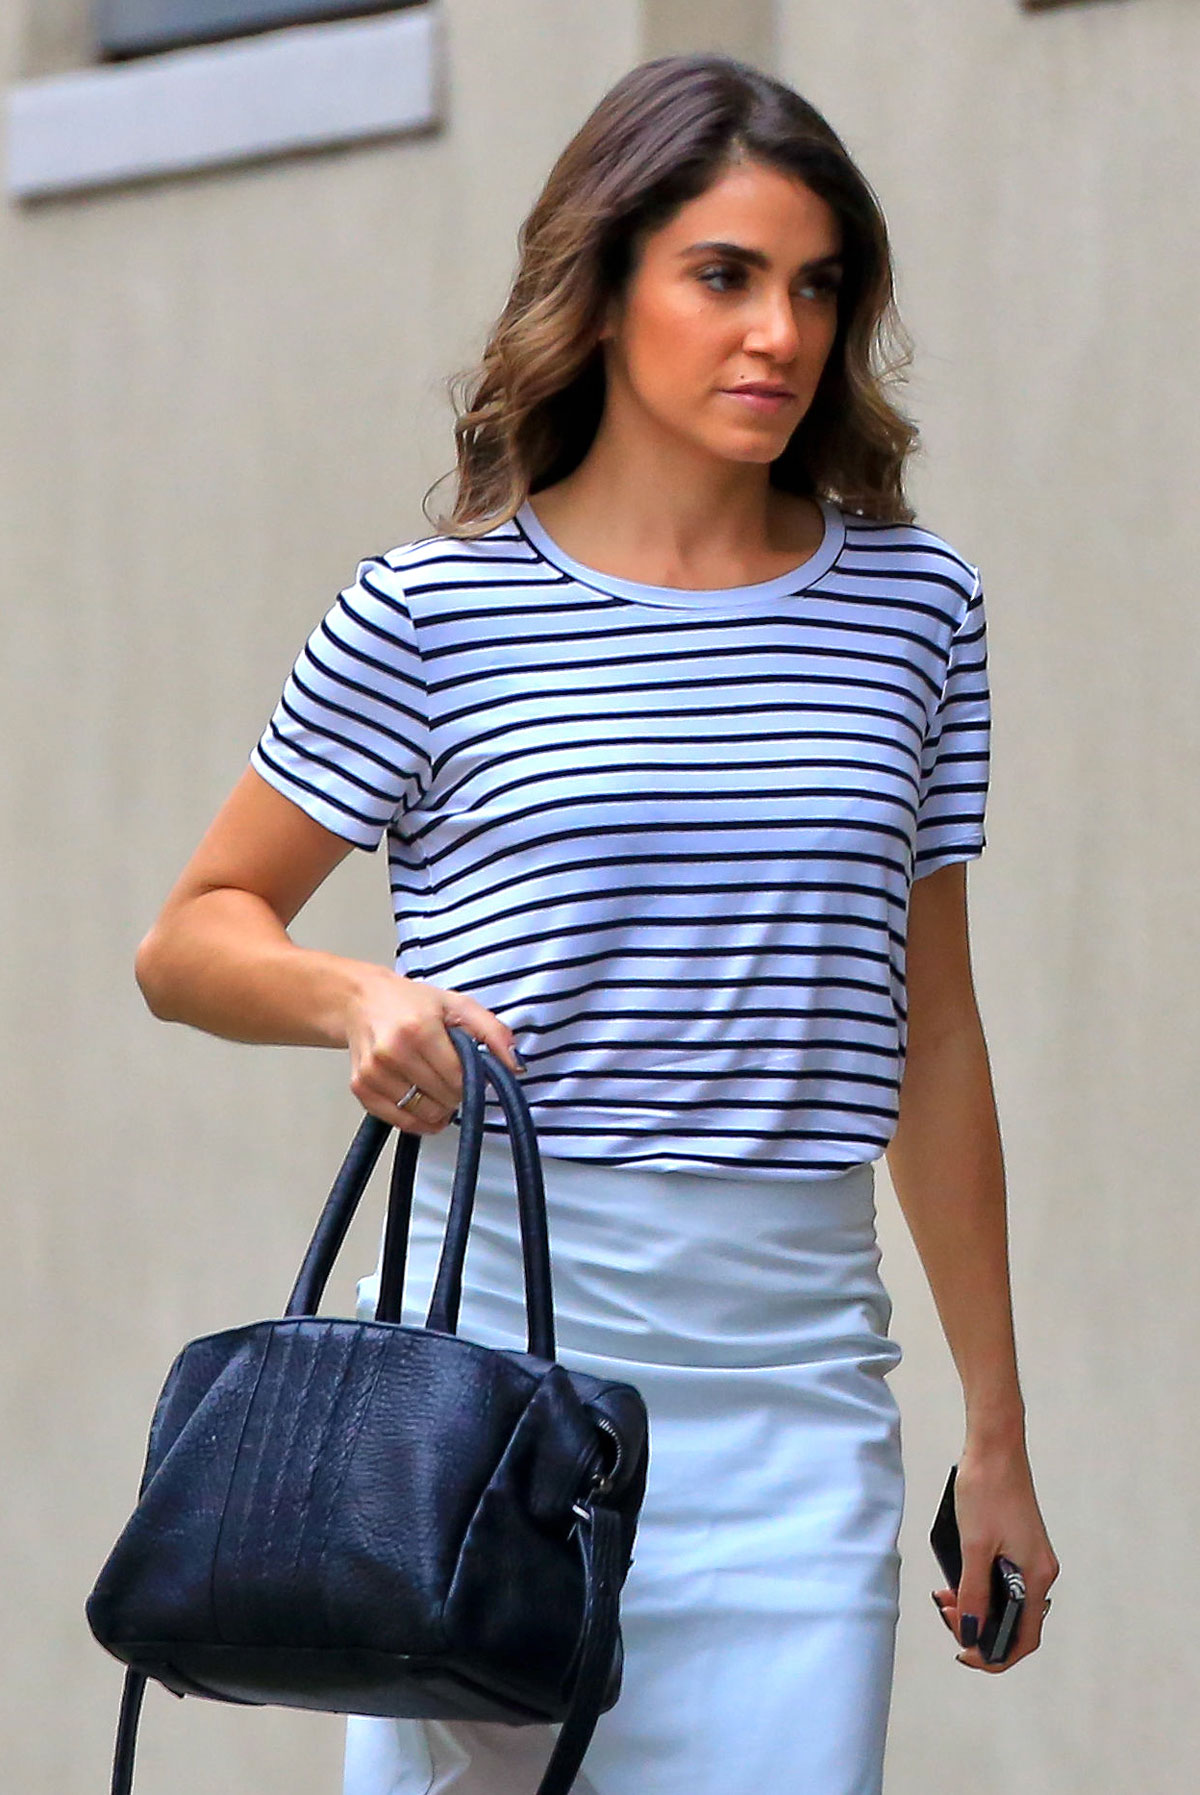 Nikki Reed out and about candids in Hollywood